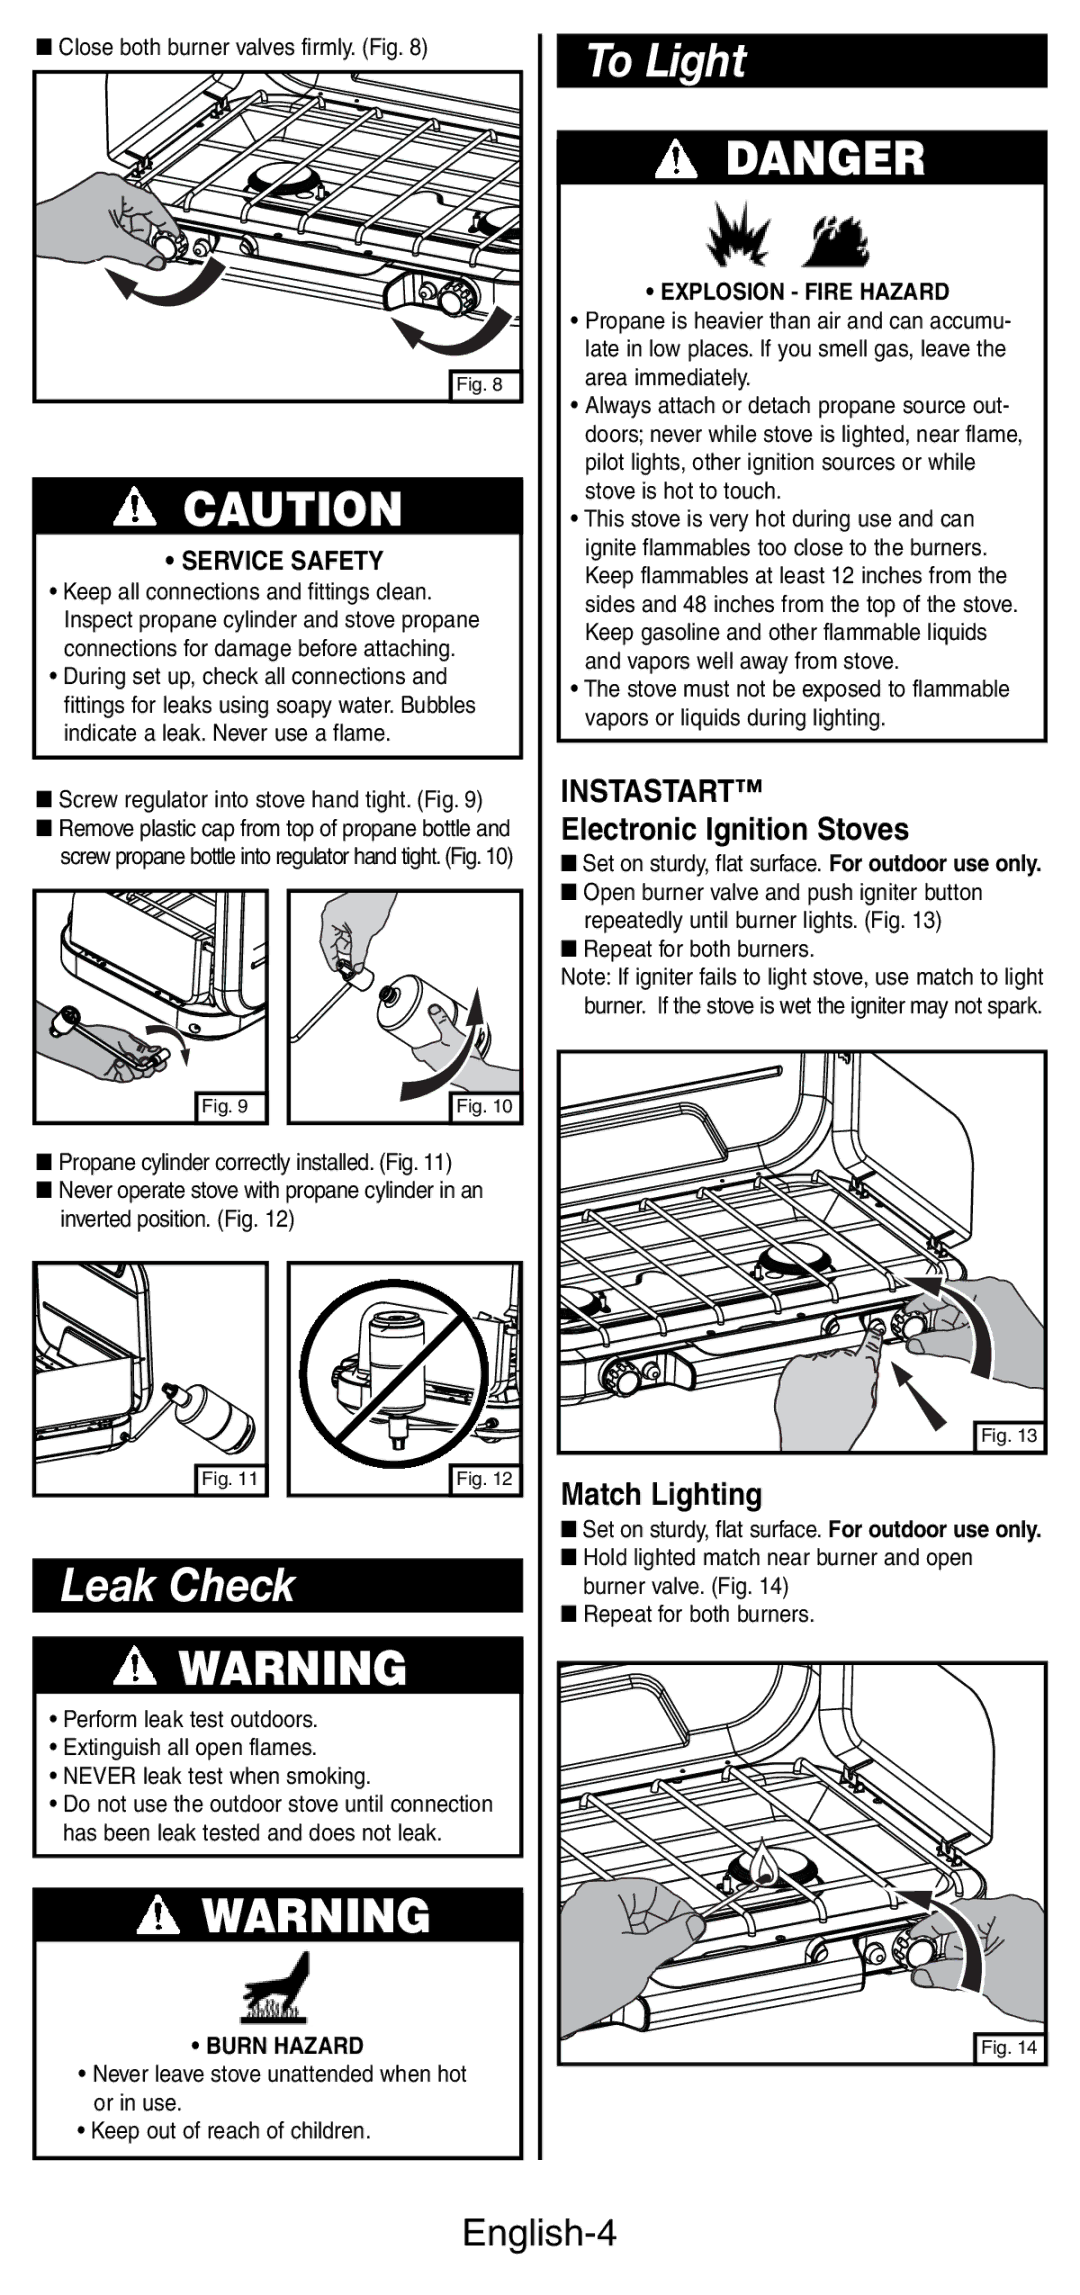 Coleman 5441 Series manual To Light, Leak Check, English-4, Electronic Ignition Stoves, Match Lighting 